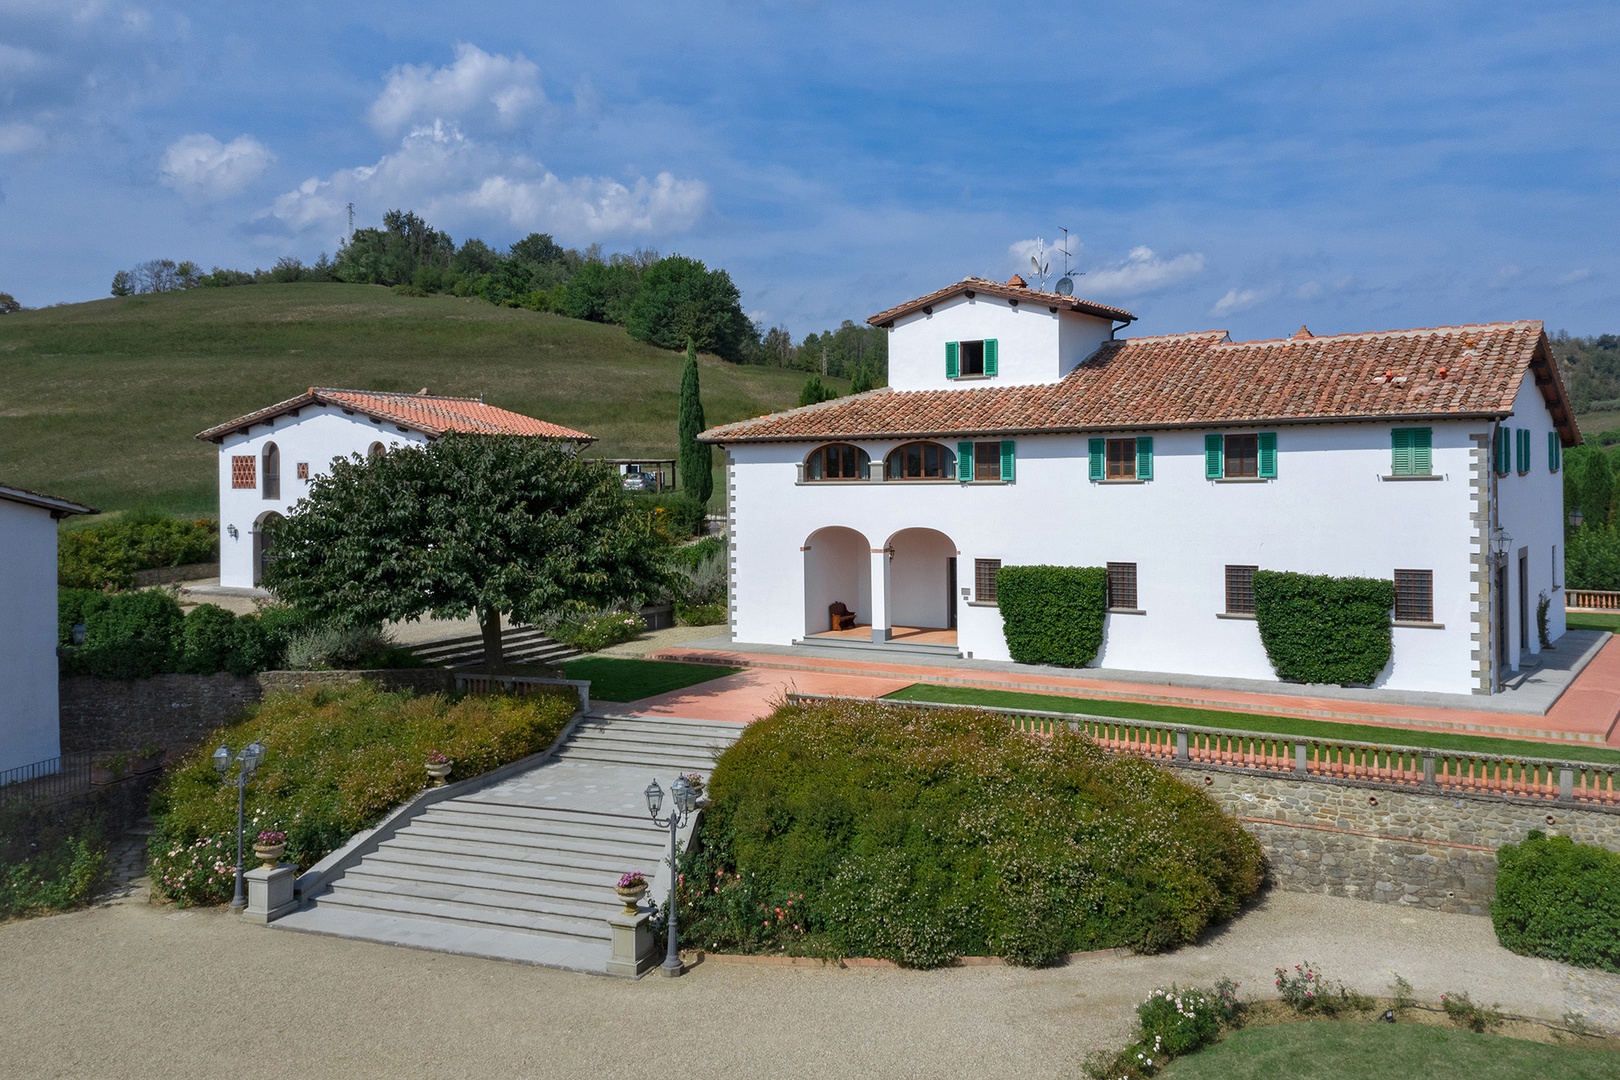 Villa Gabbiano is a beautiful, spacious estate that still manages to feel intimate.